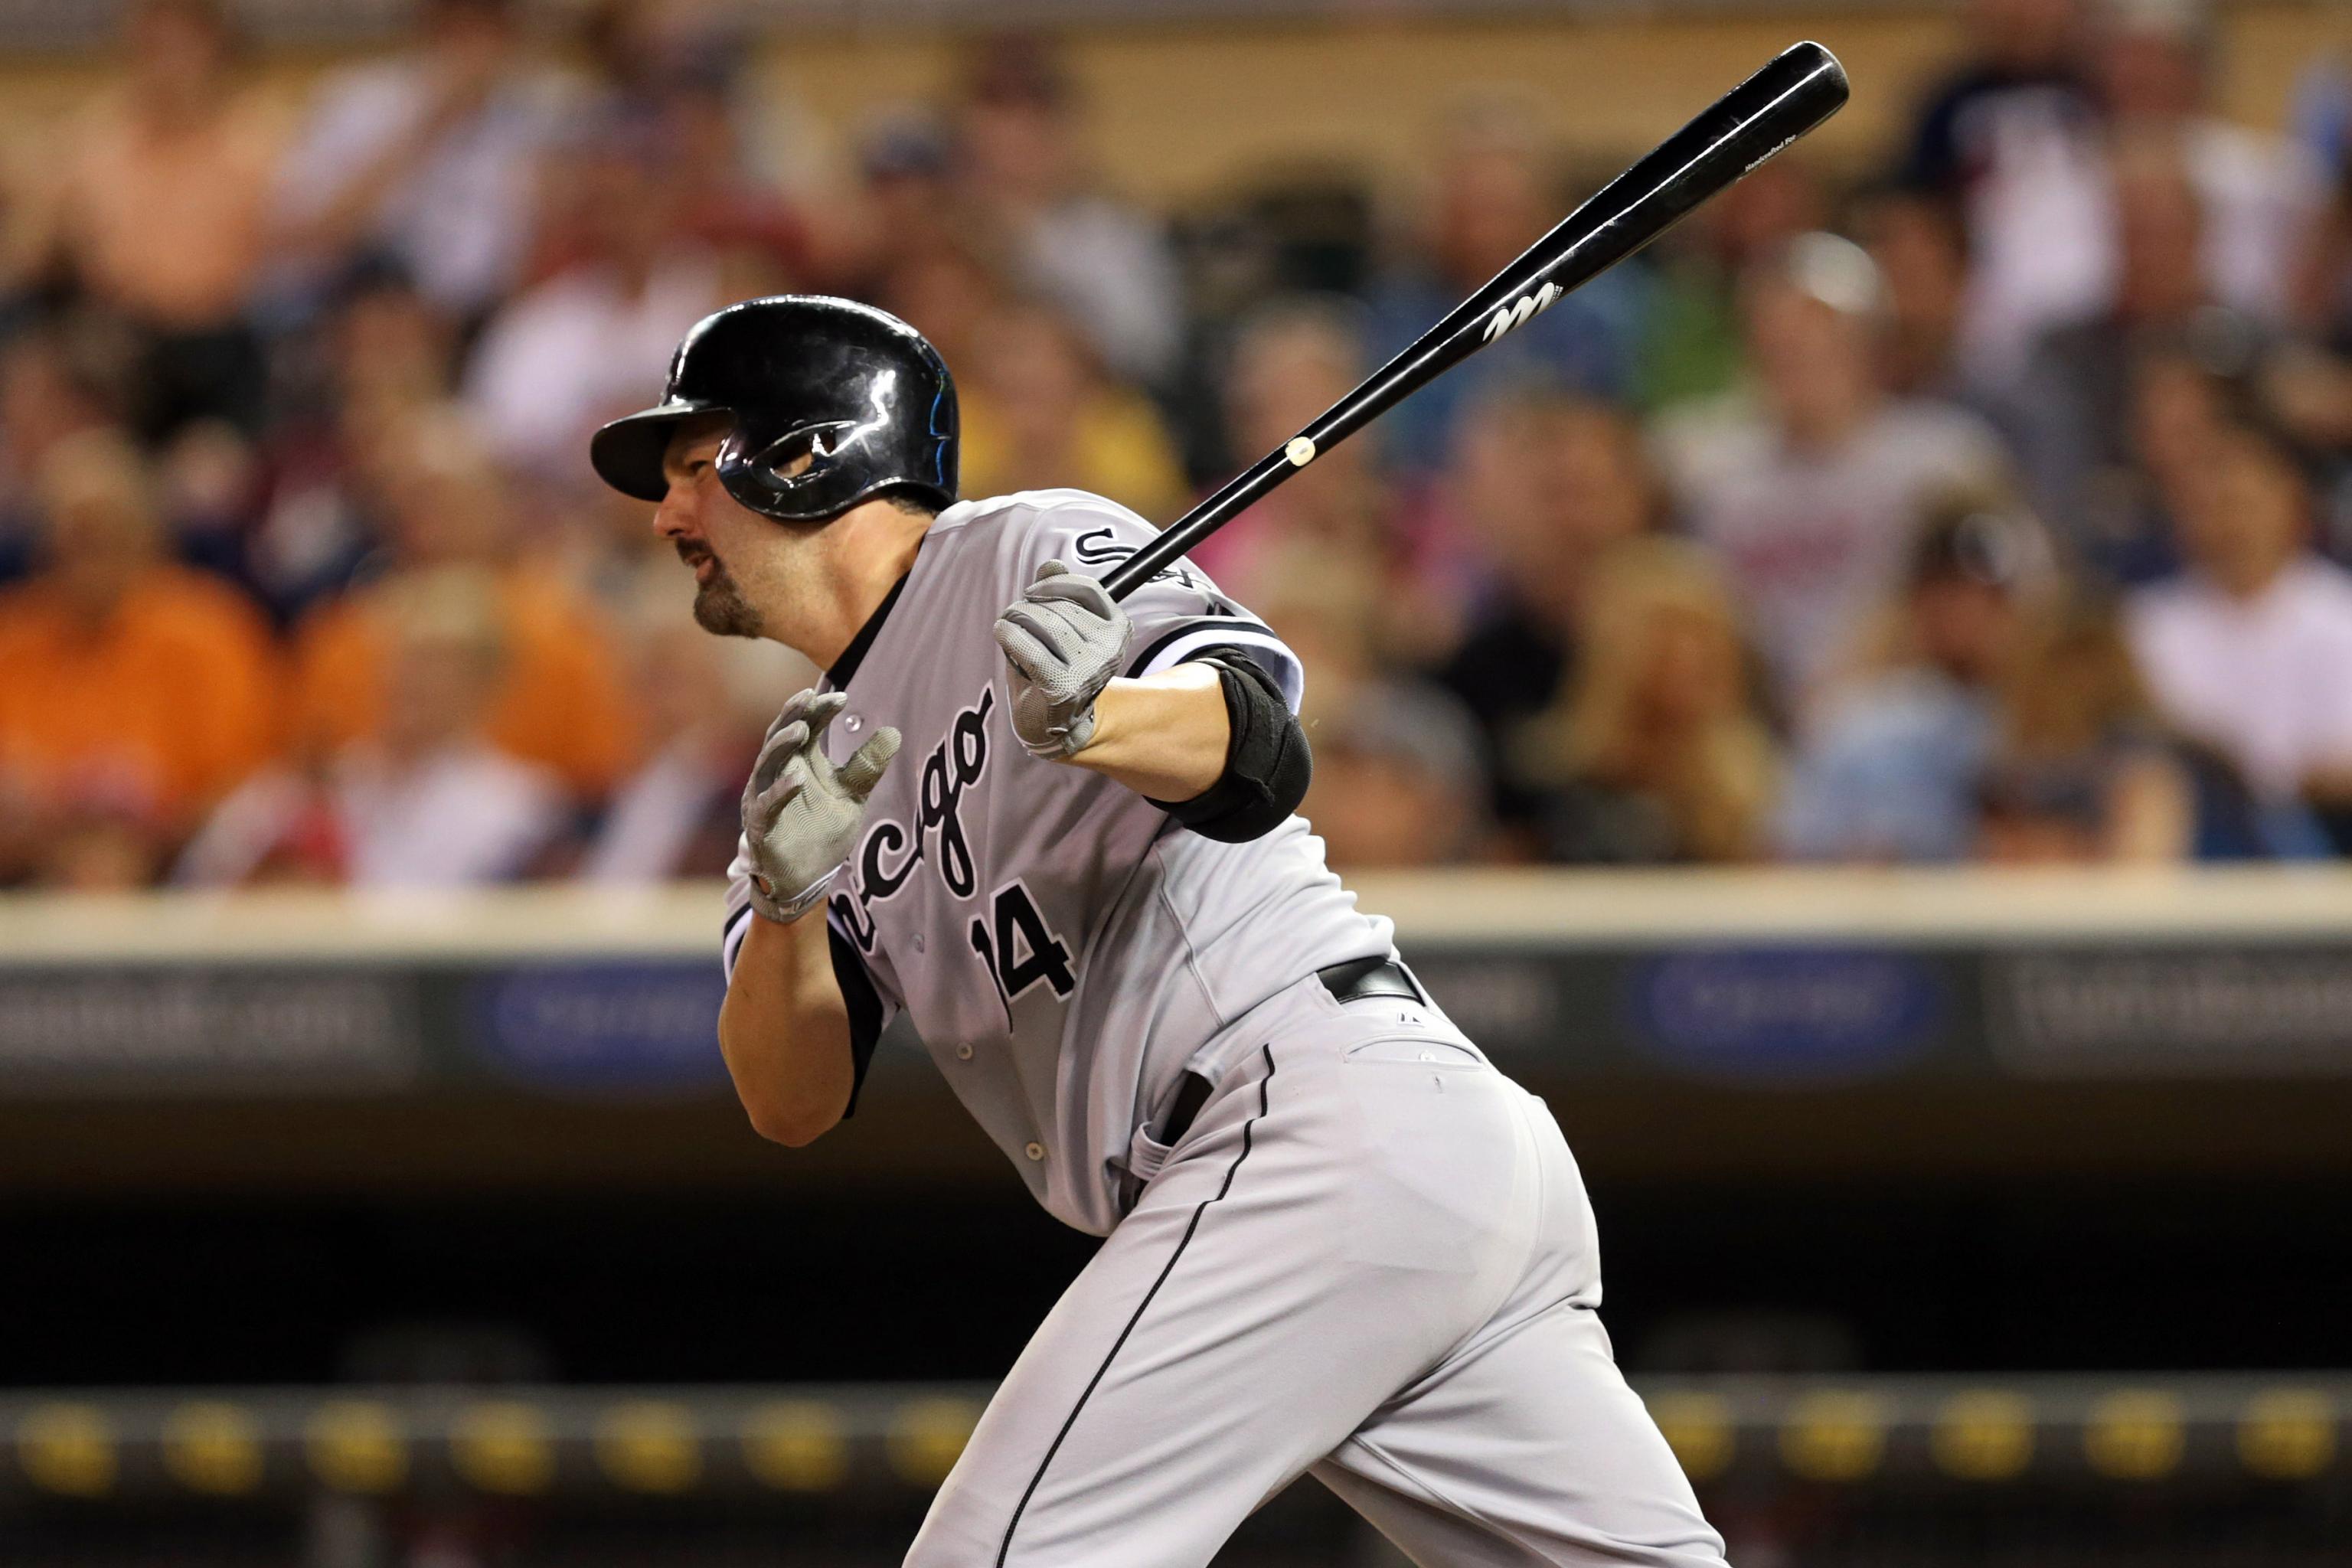 Everyman Paul Konerko of Chicago White Sox fit his town and fan